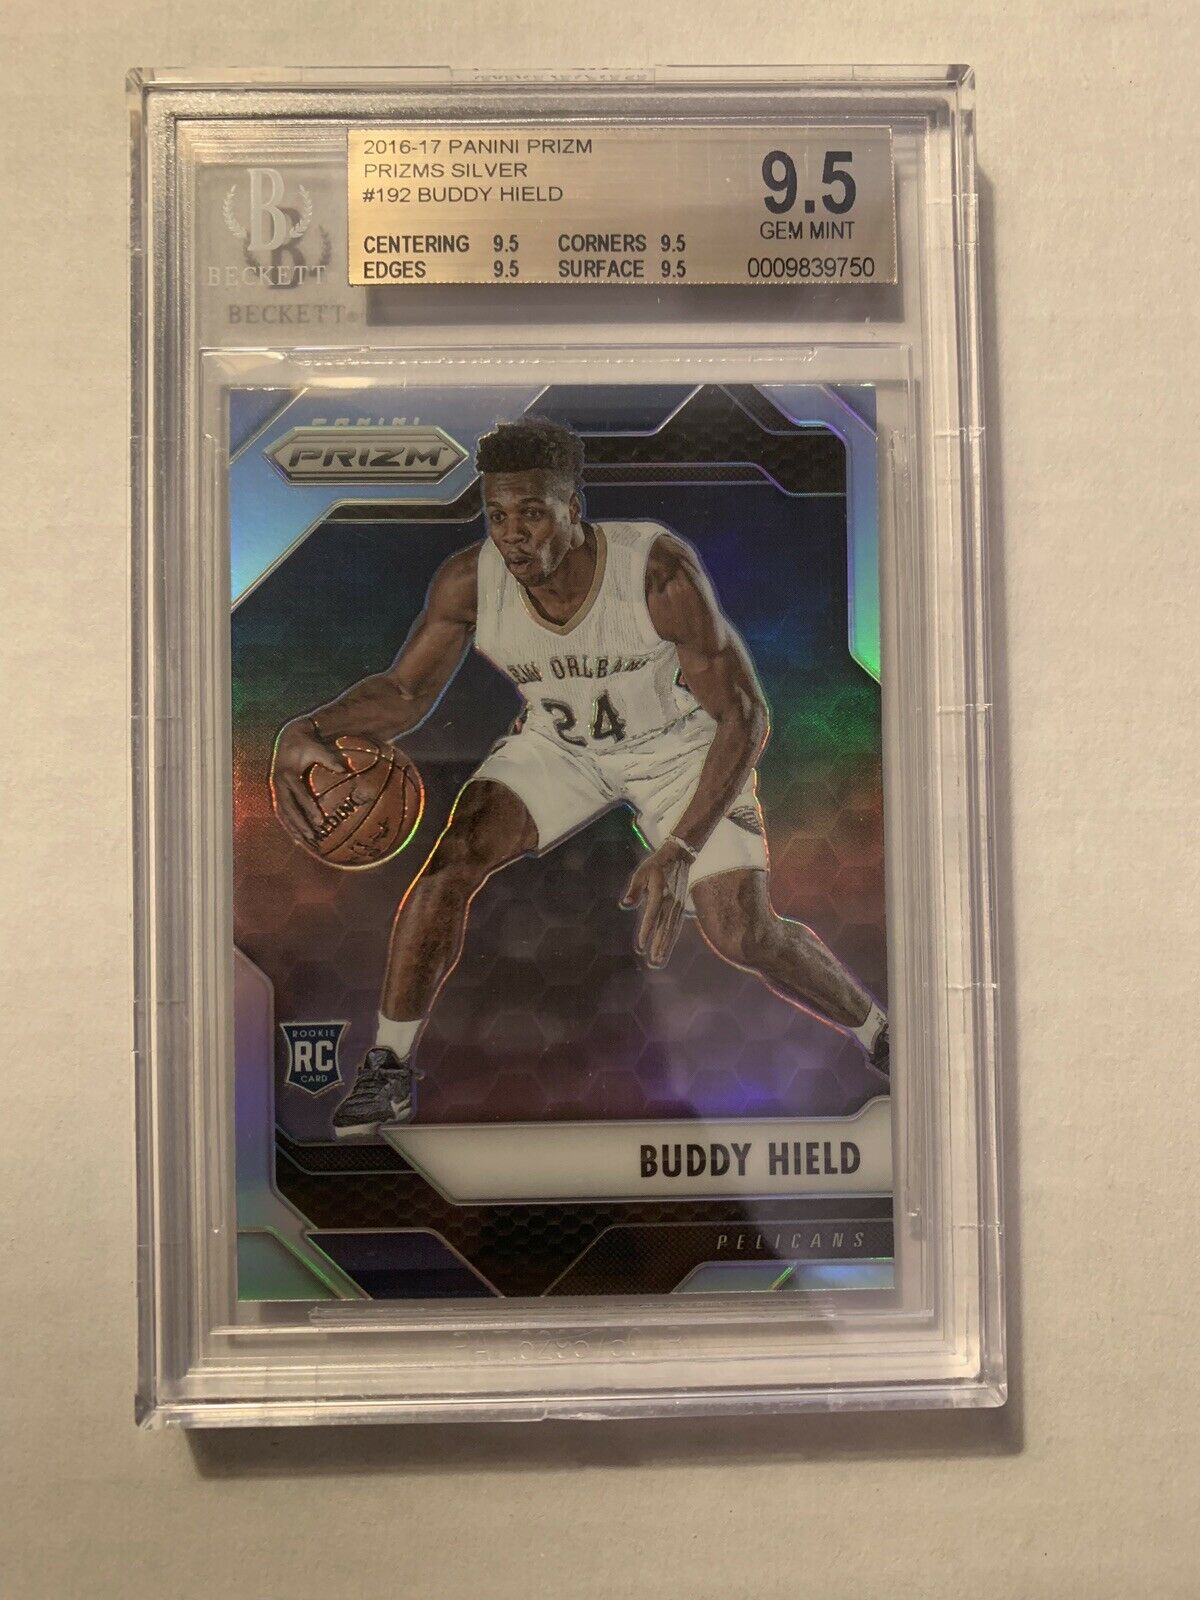 Image of 2016-17 Panini PrizmS Silver Buddy Hield sports trading card